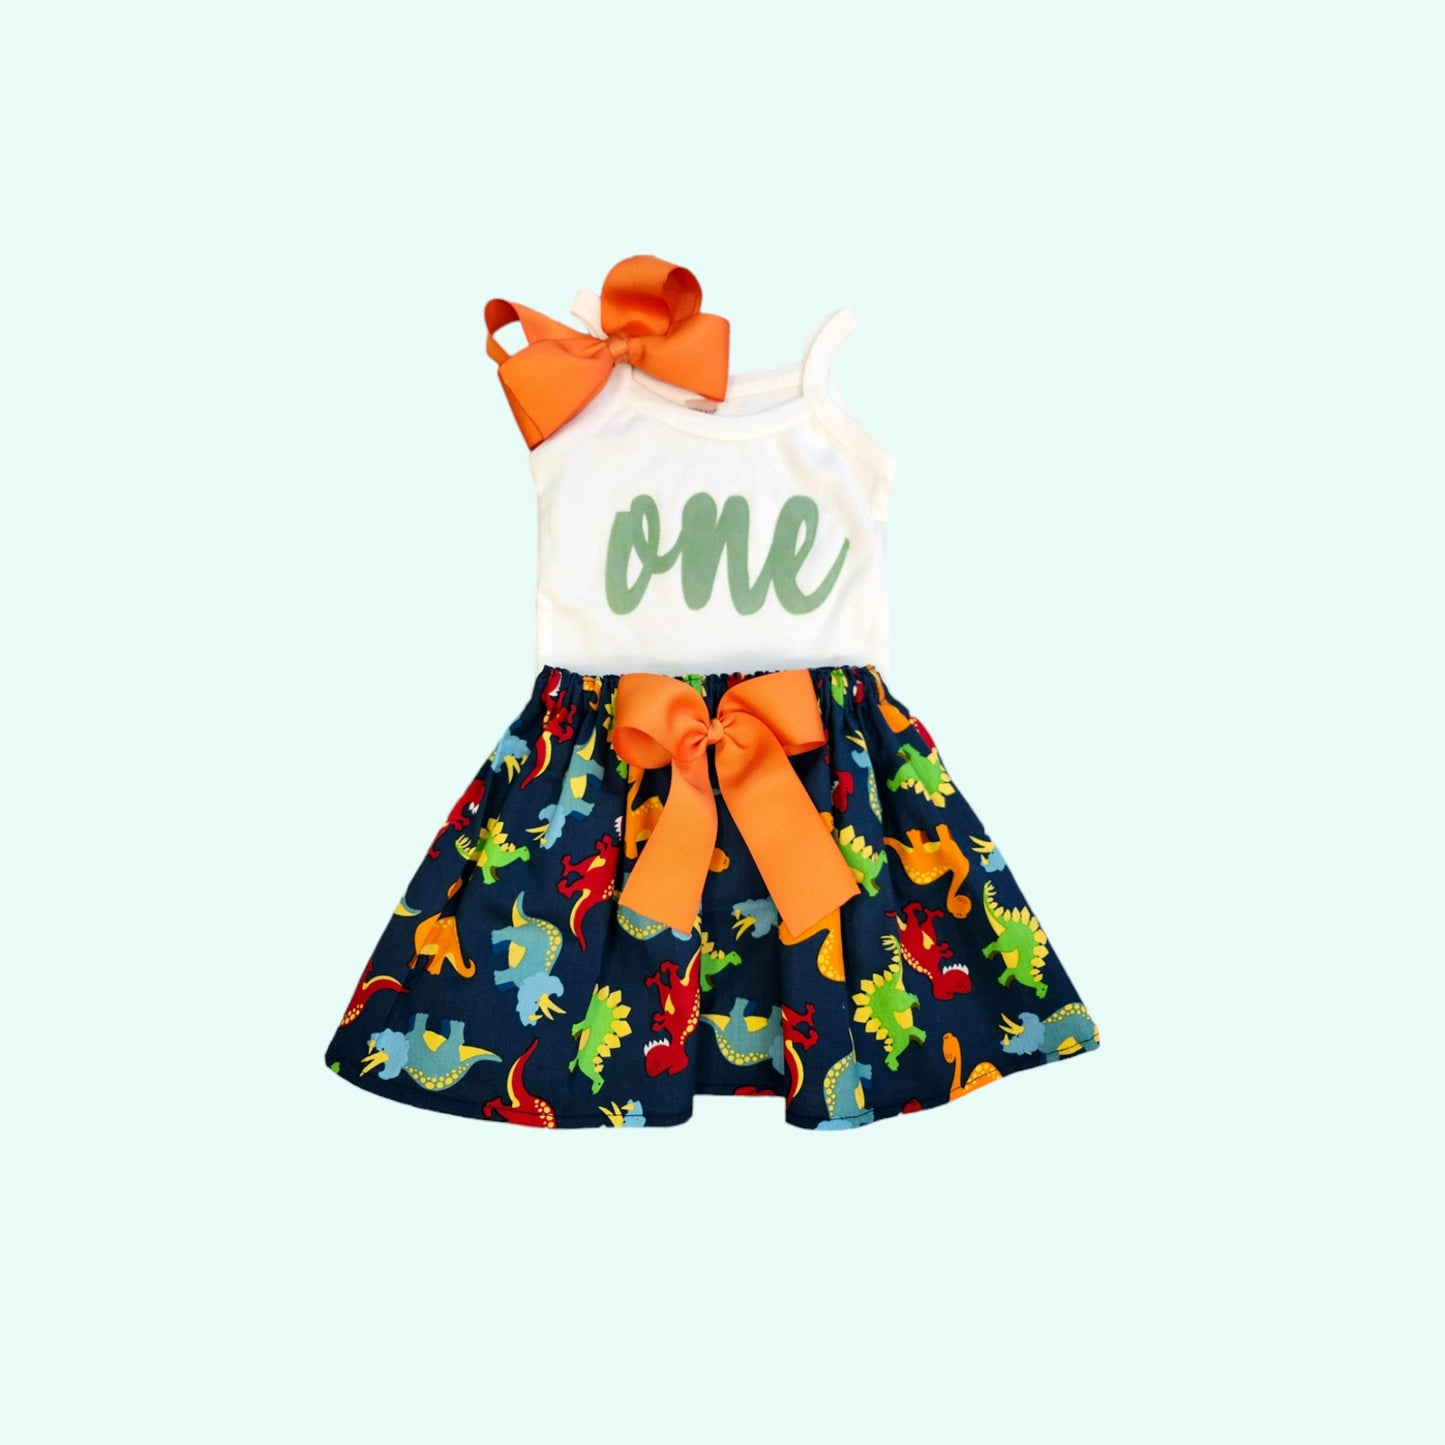 Dinosaurs girls outfit, Birthday age outfit, Dinosaurs skirt for girls, Dinosaurs outfit, Girls summer skirt shirt outfit